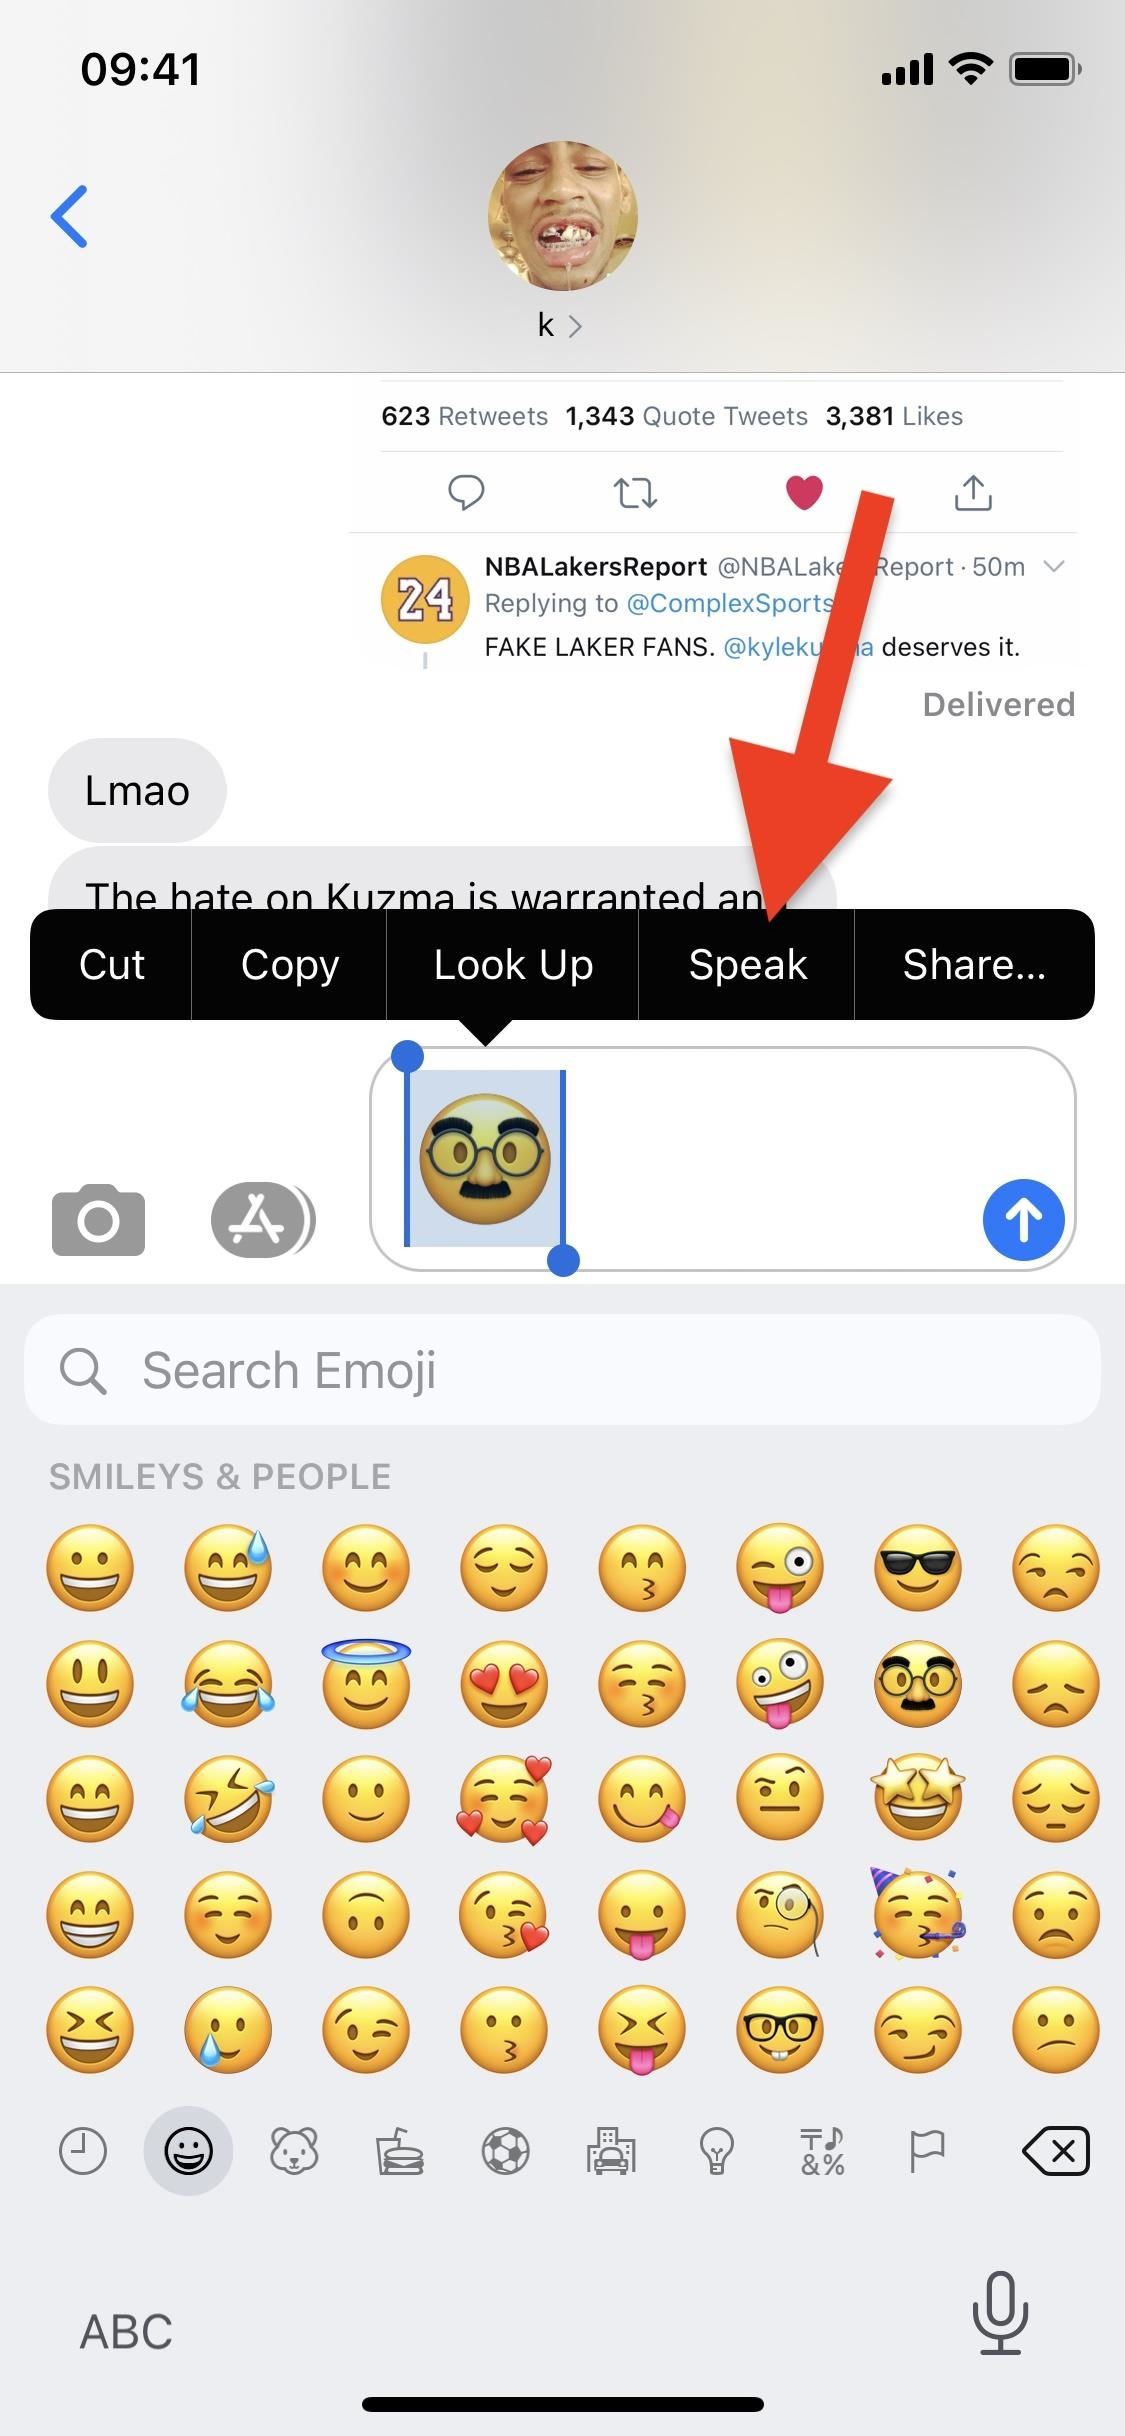 Make Your iPhone Tell You the Secret Meaning of Emoji So They're Easier to Find Later